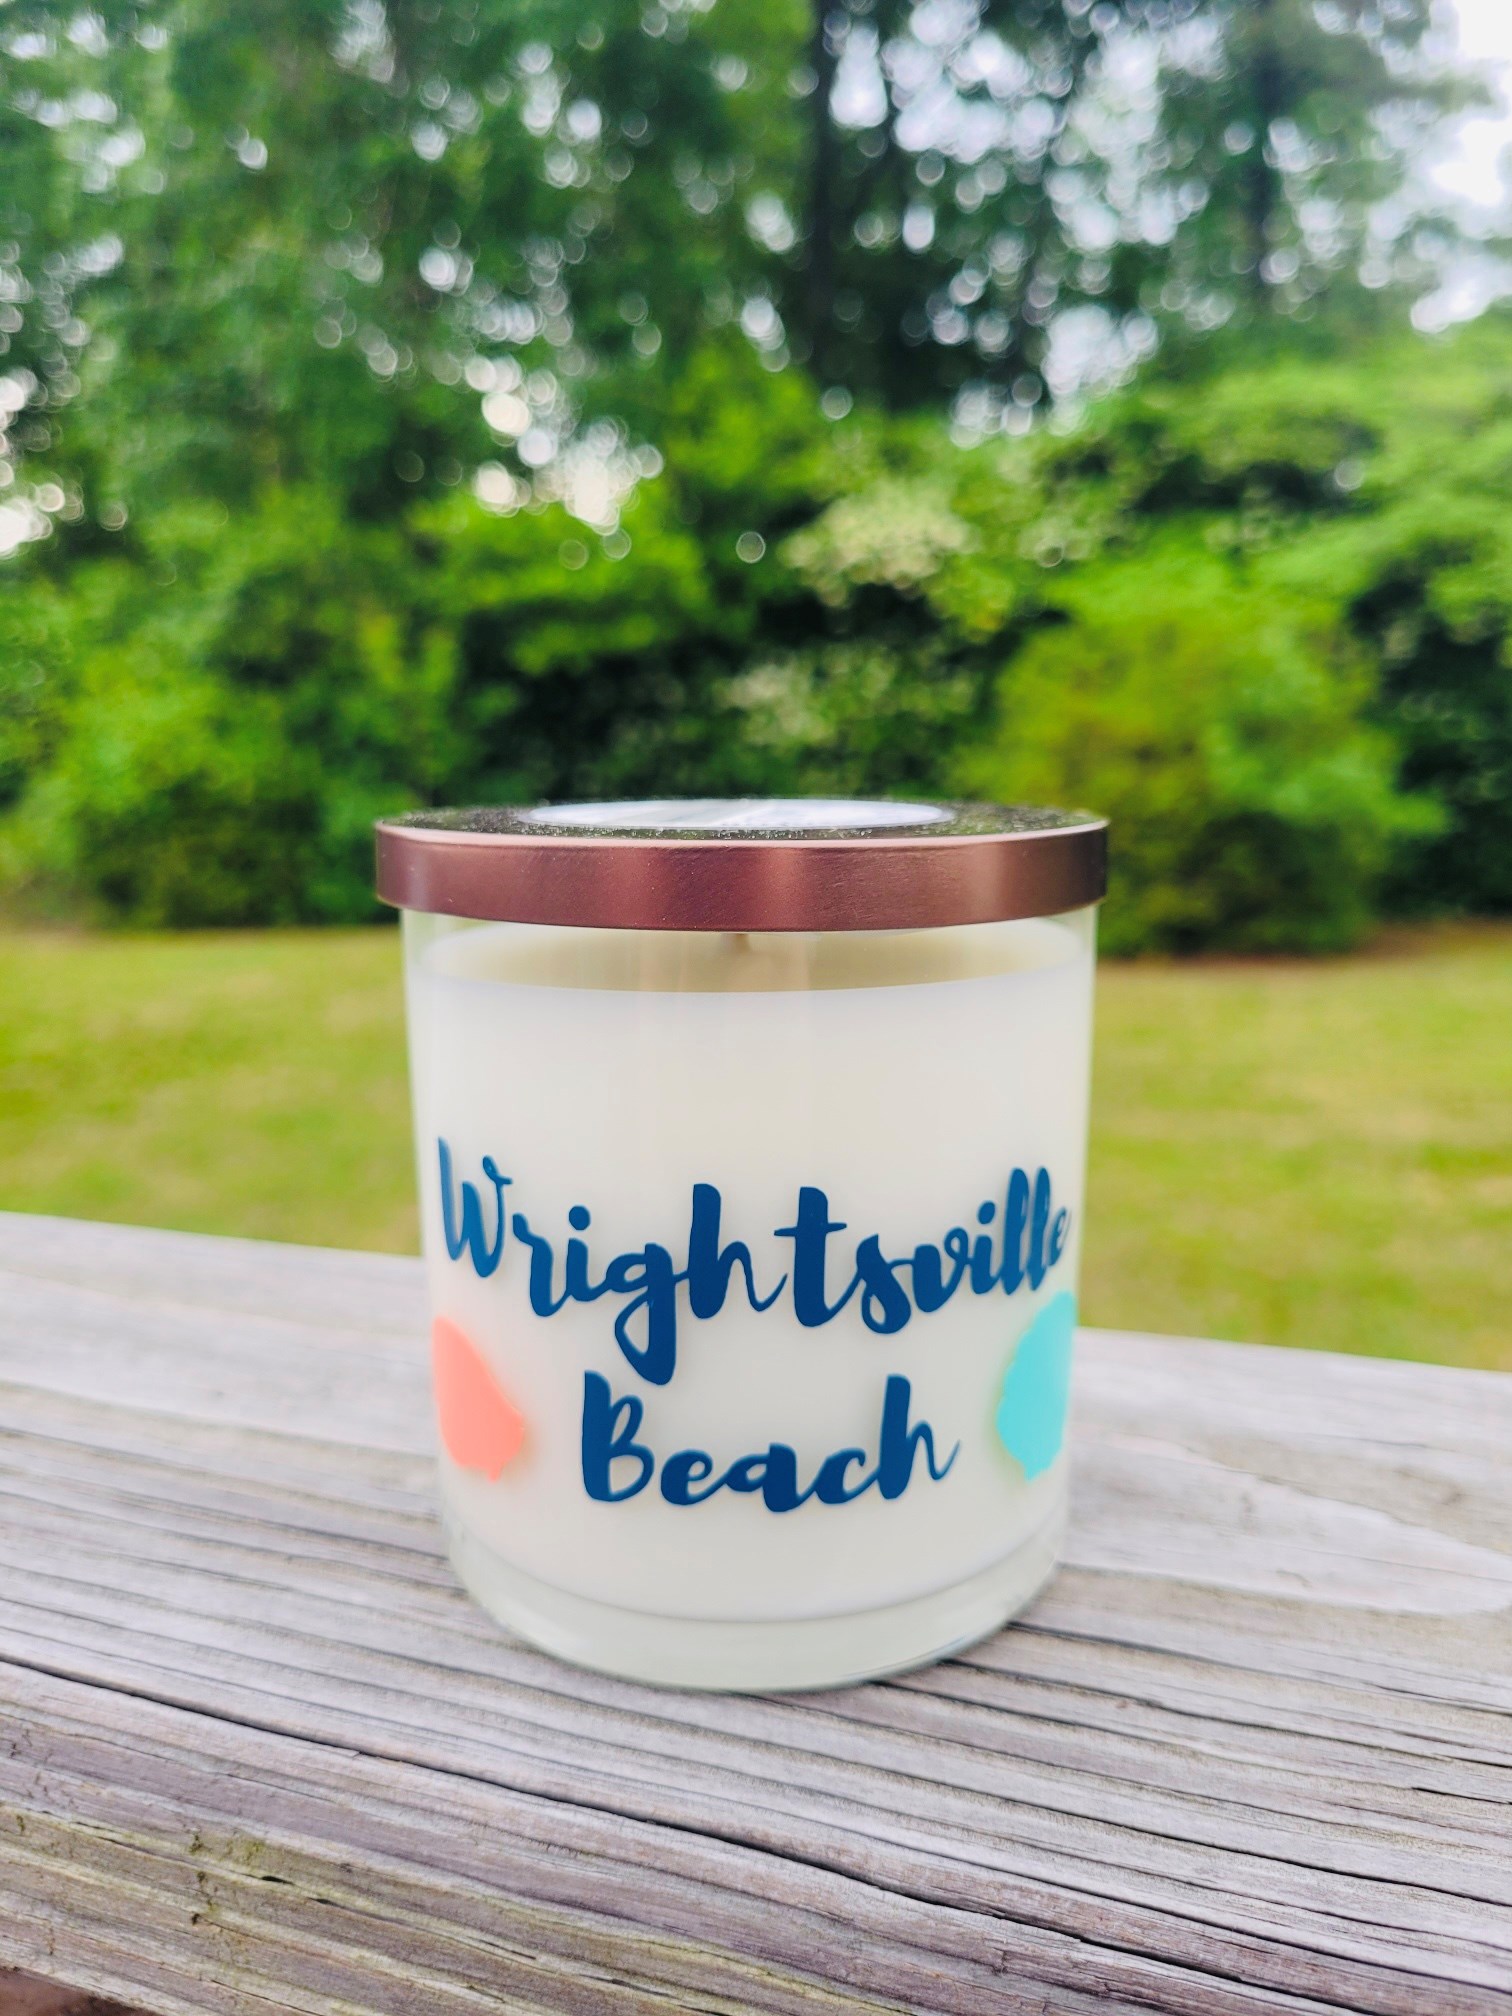  Wrightsville Beach candle